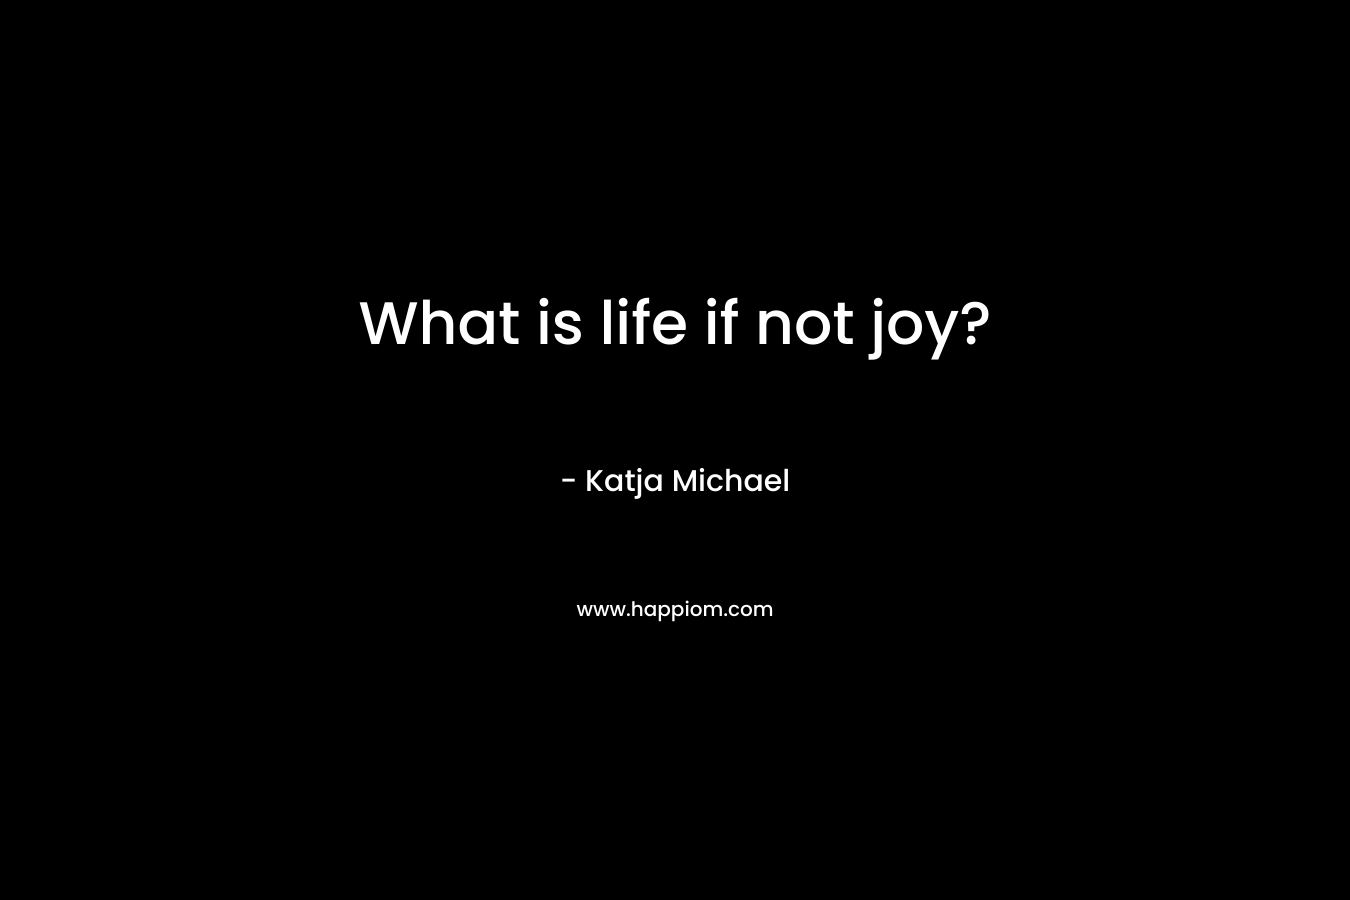 What is life if not joy?